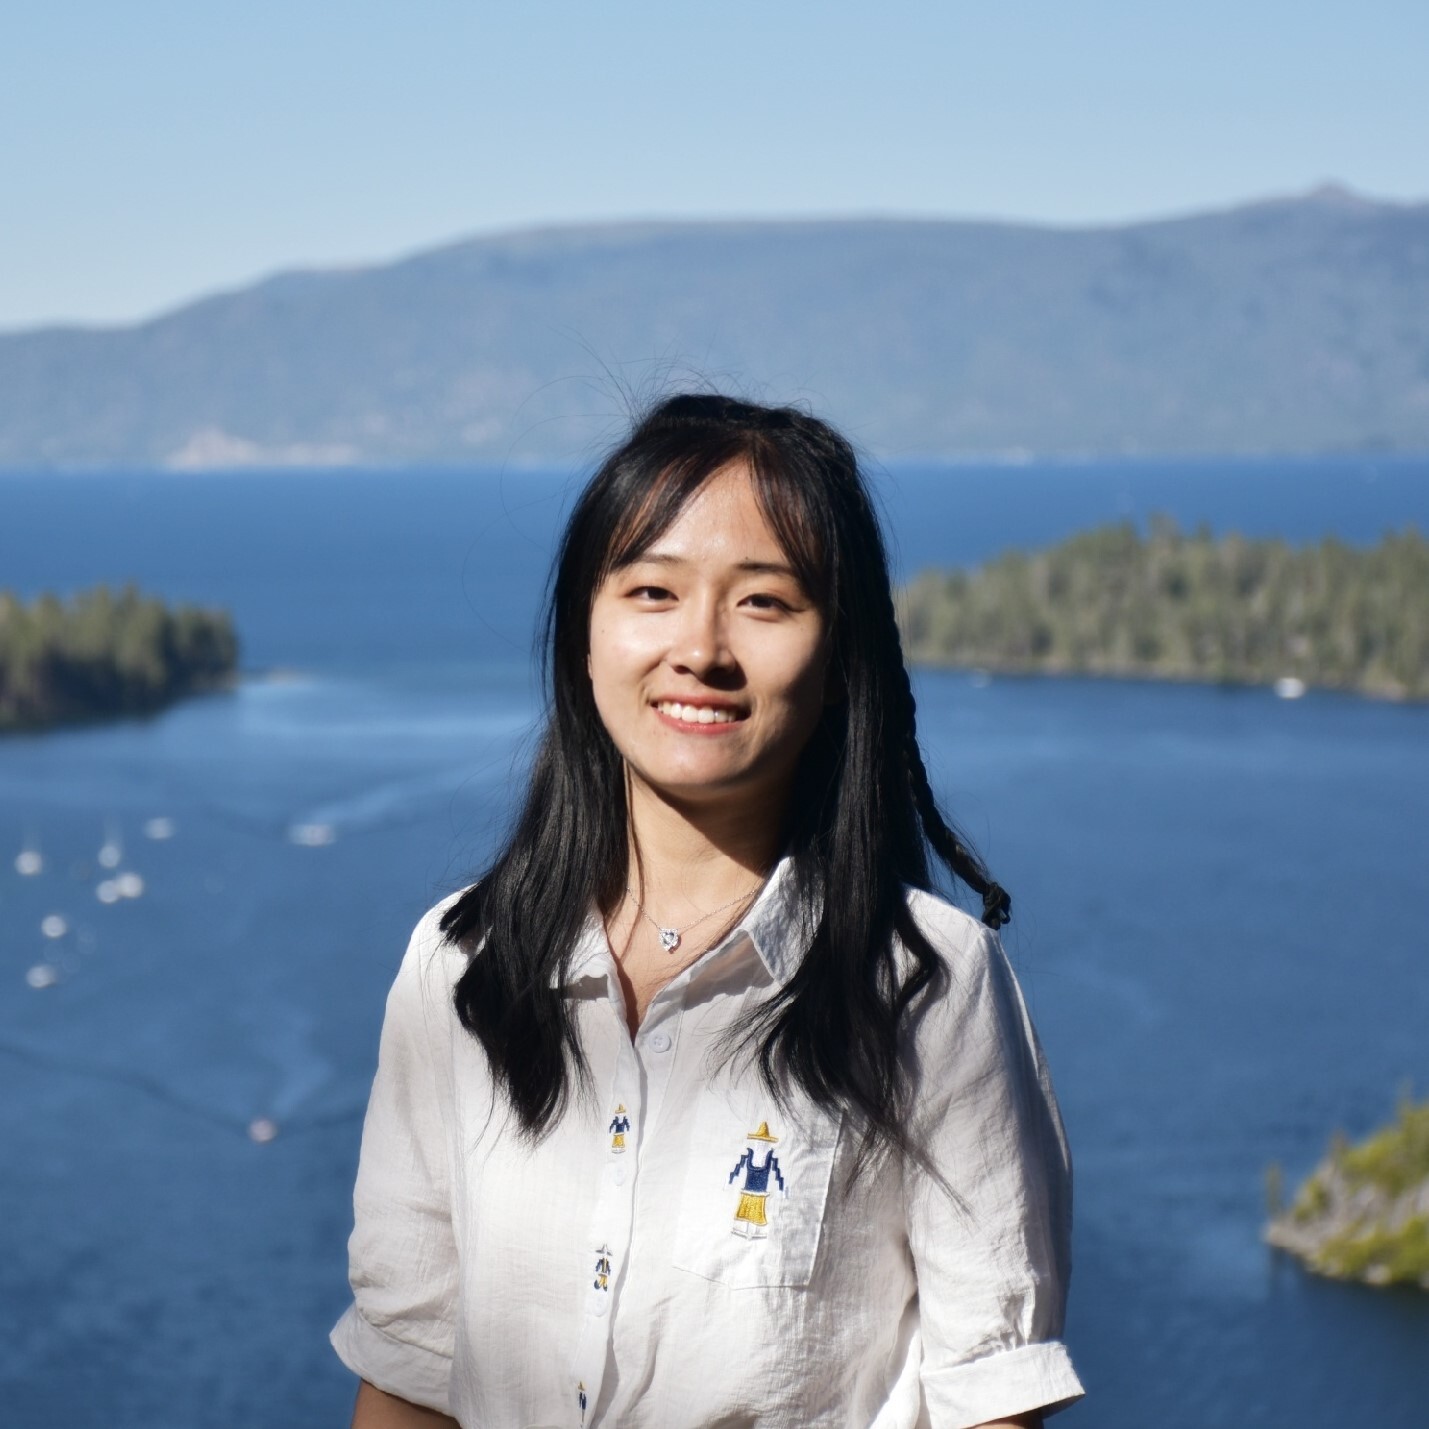 Emma Liu standing in front of background of a lake